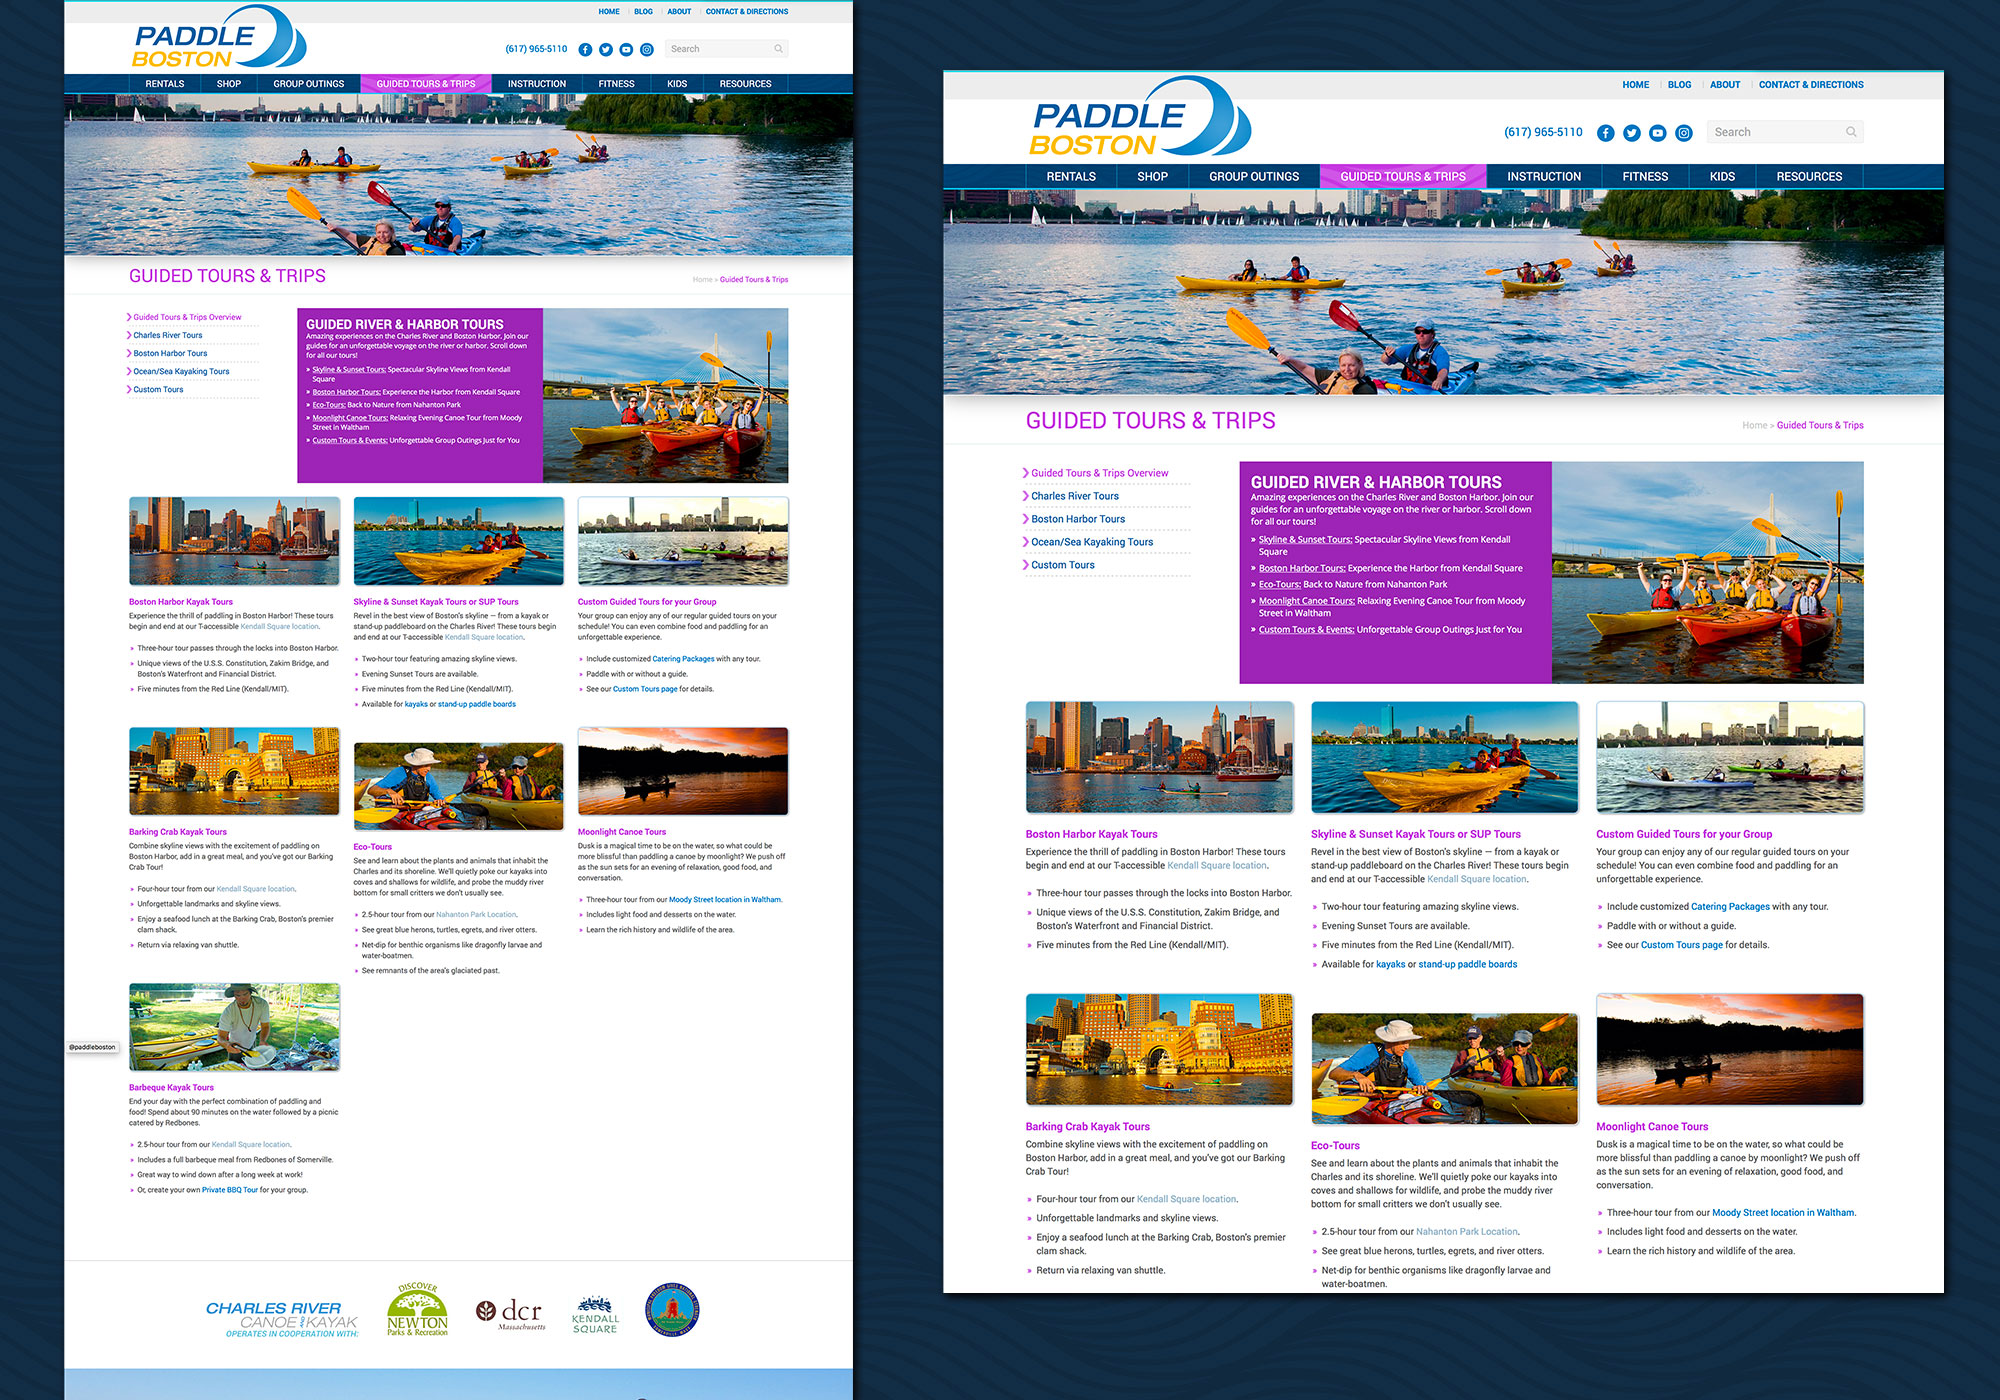 Guided Tours section has a specific color scheme in this custom wordpress website design for Paddle Boston by Portland, Maine website design company, SlickFish Studios.